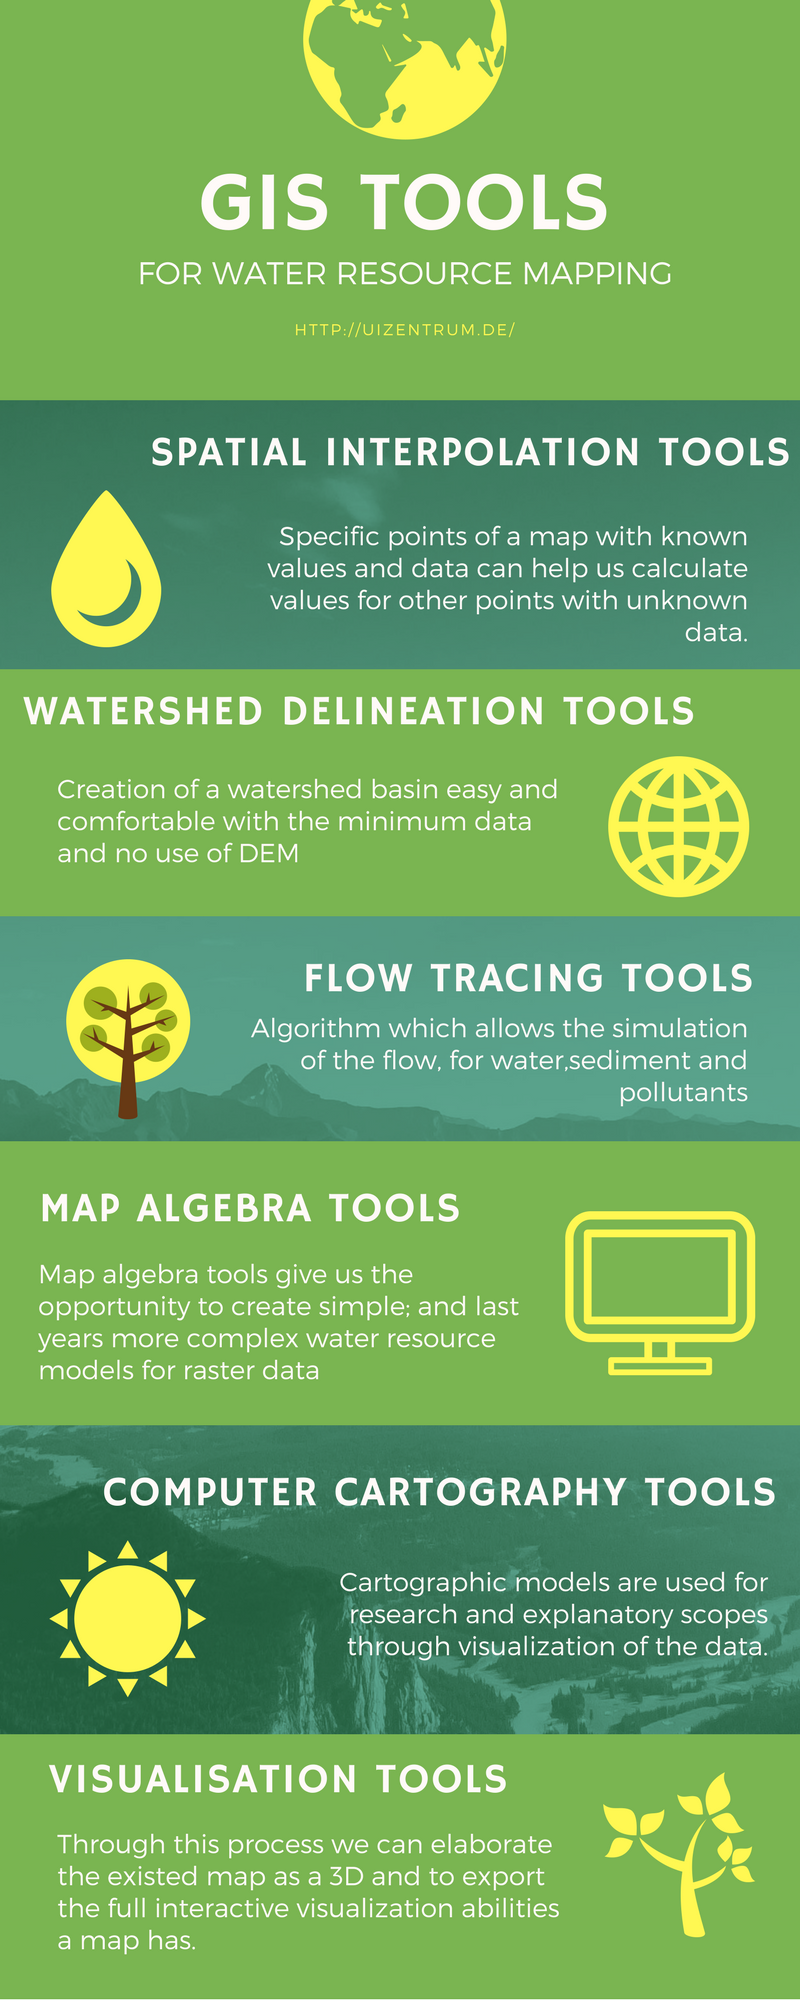 GIS for water resource mapping